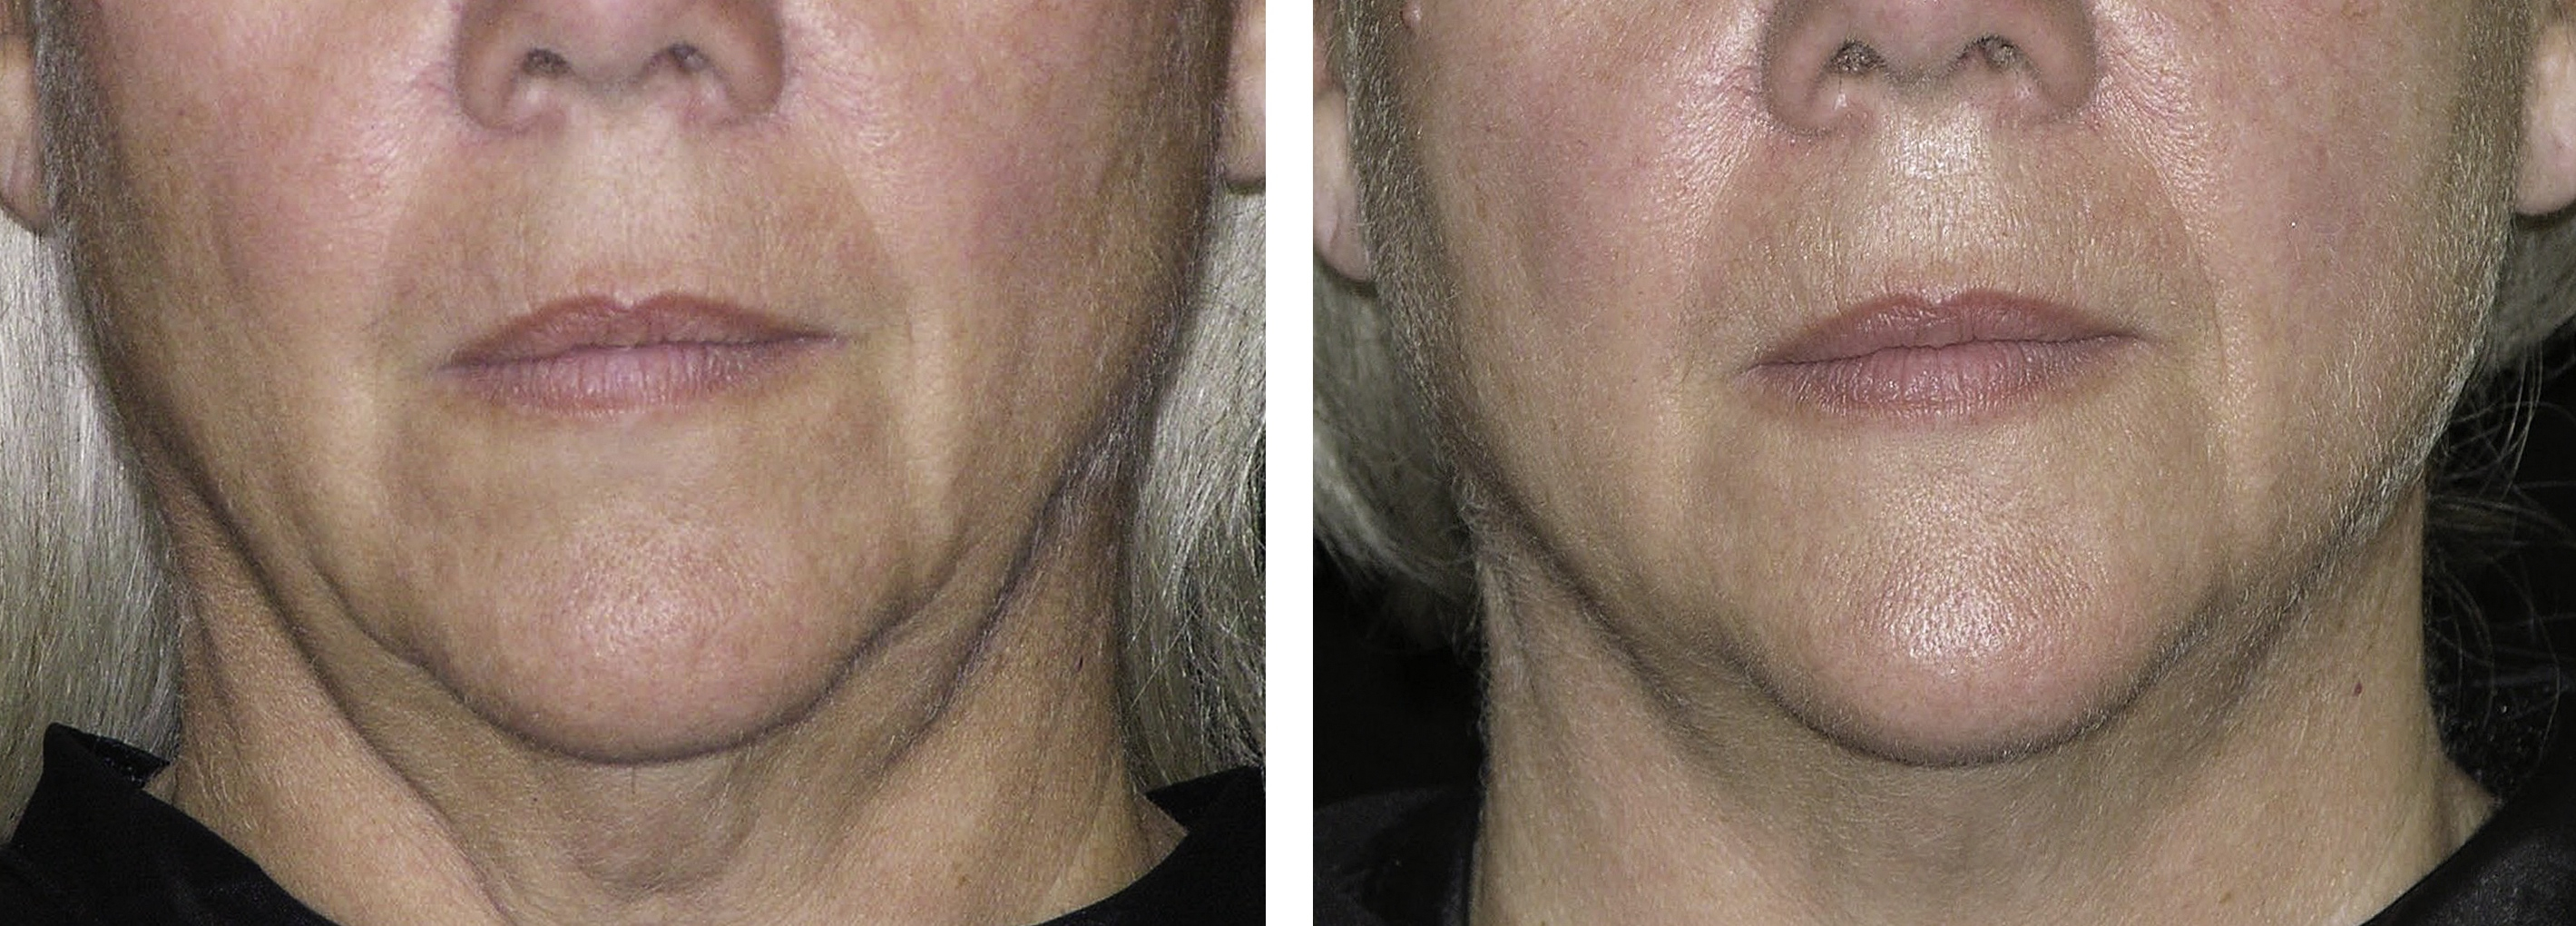 Thermage Neck Skin Tightening Non Surgical